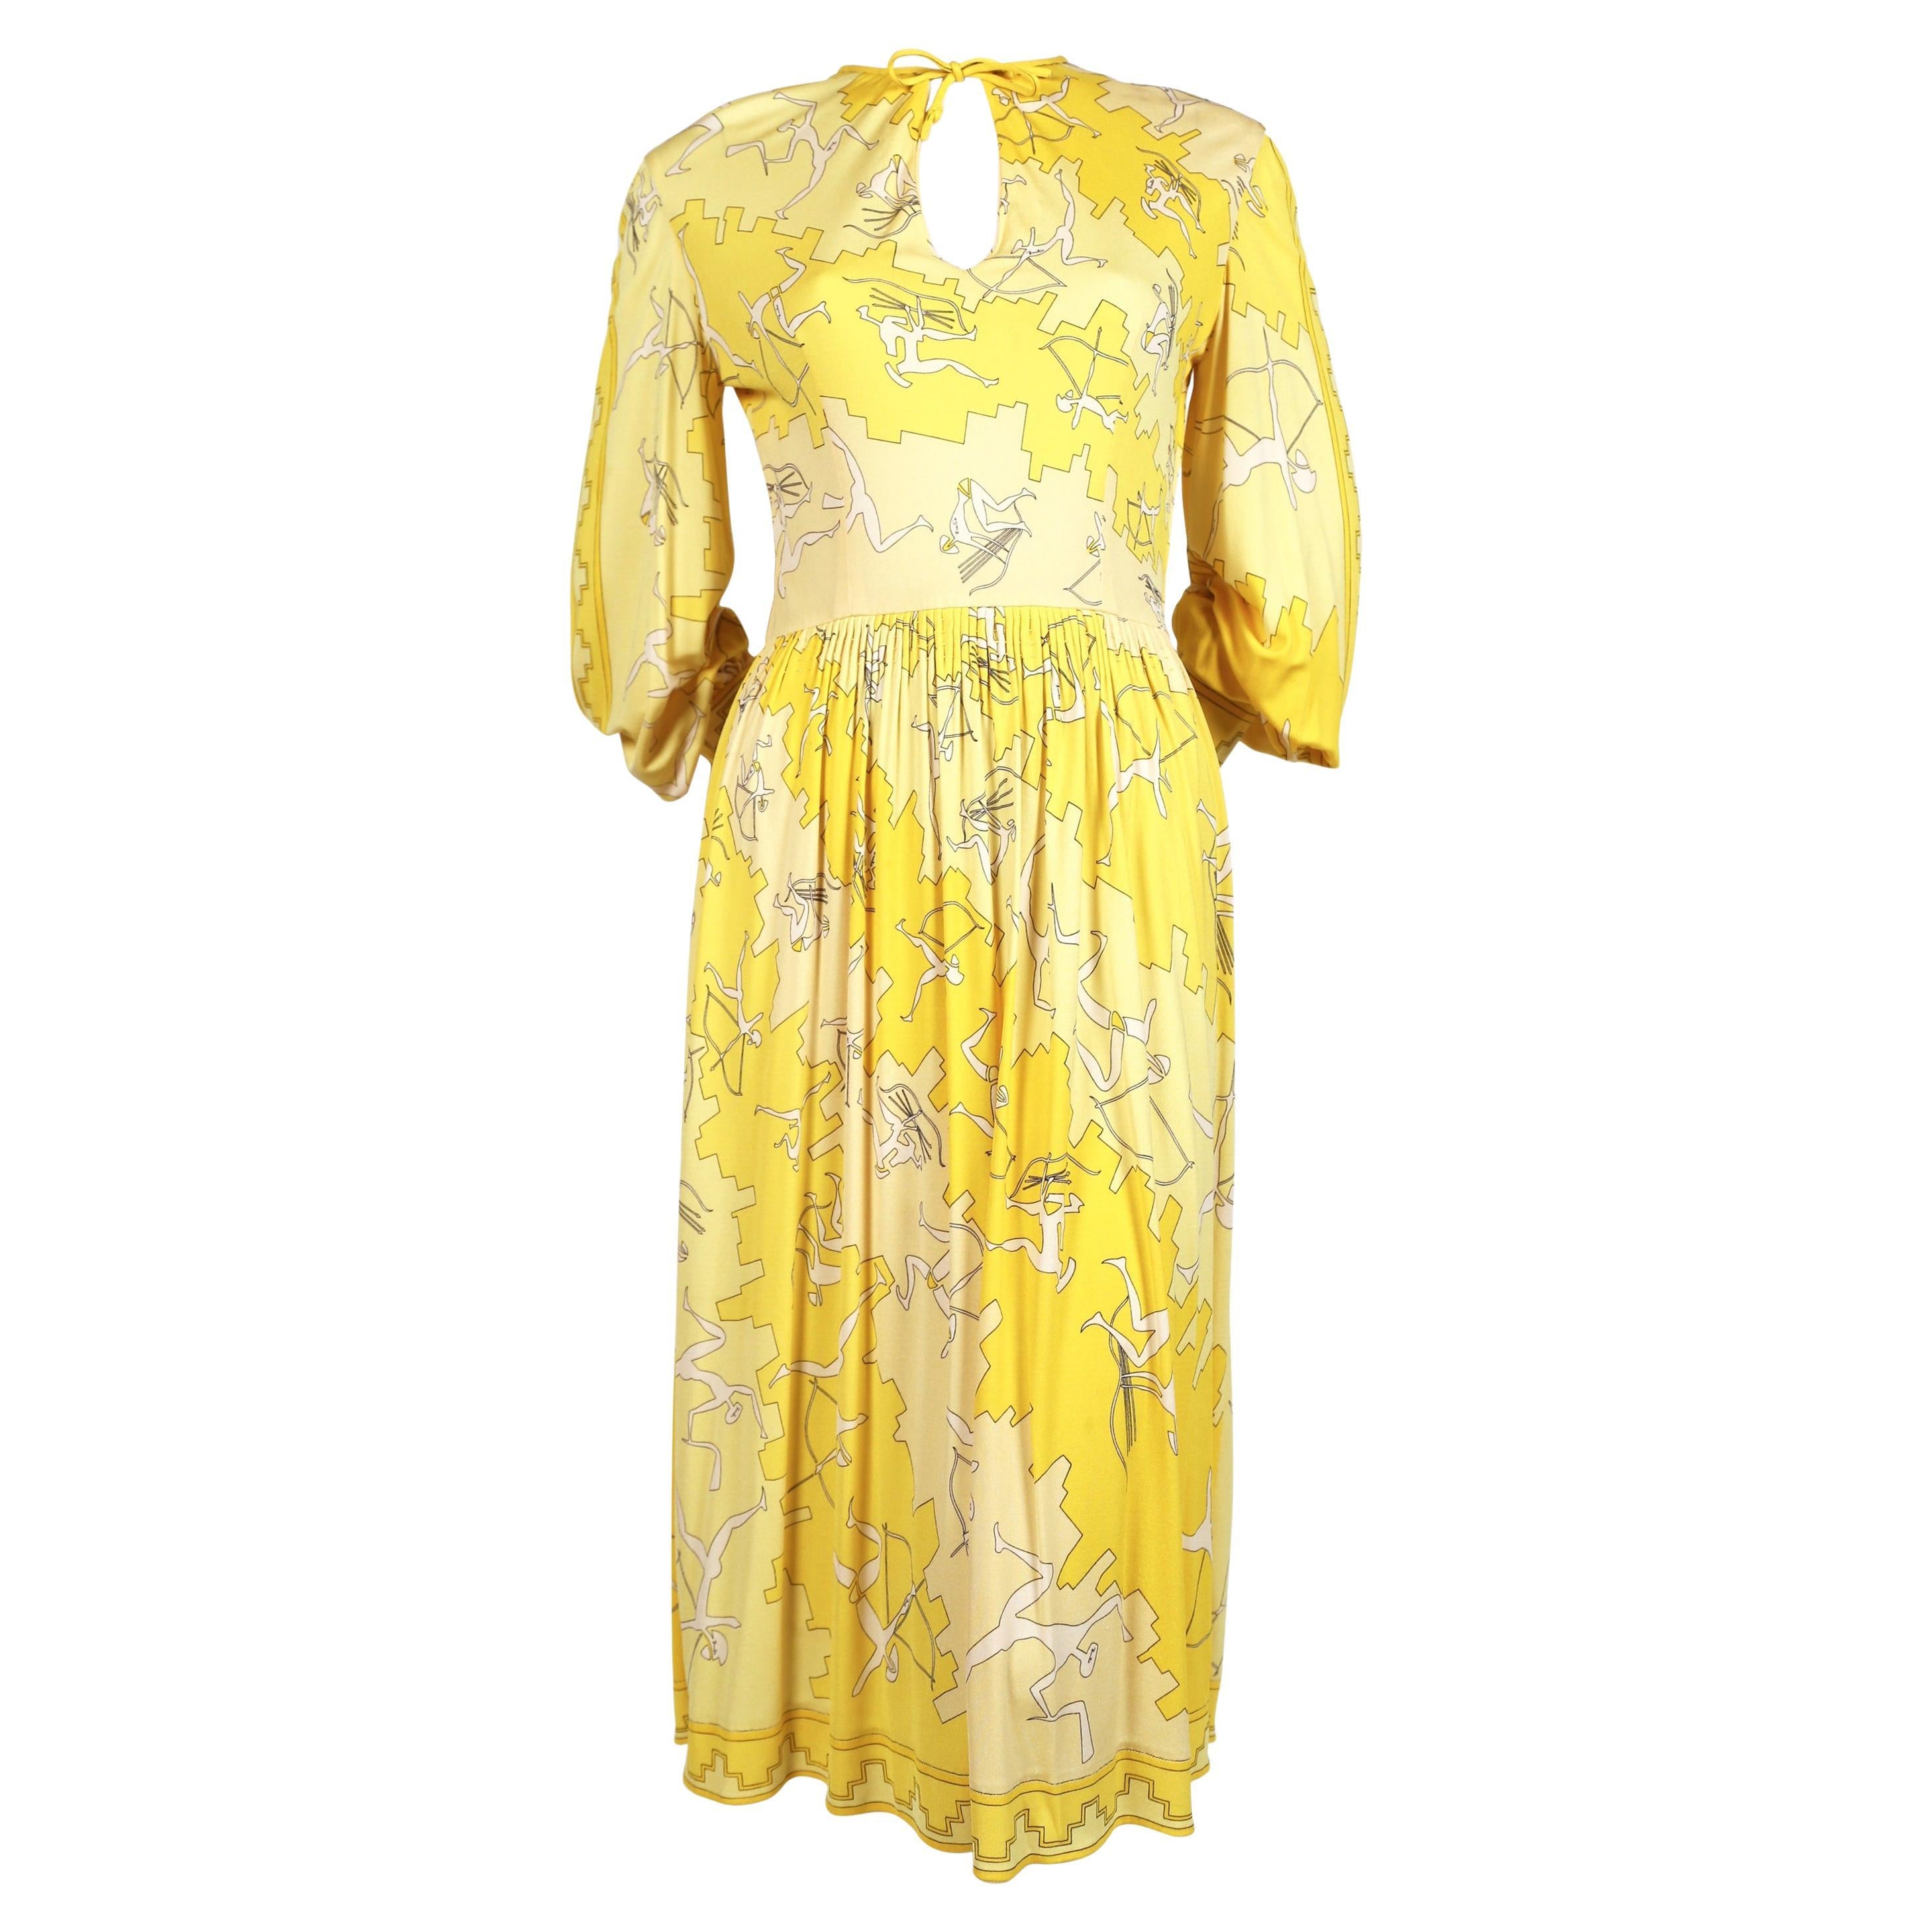 1970's EMILIO PUCCI archery print silk jersey dress with hand stitching For Sale